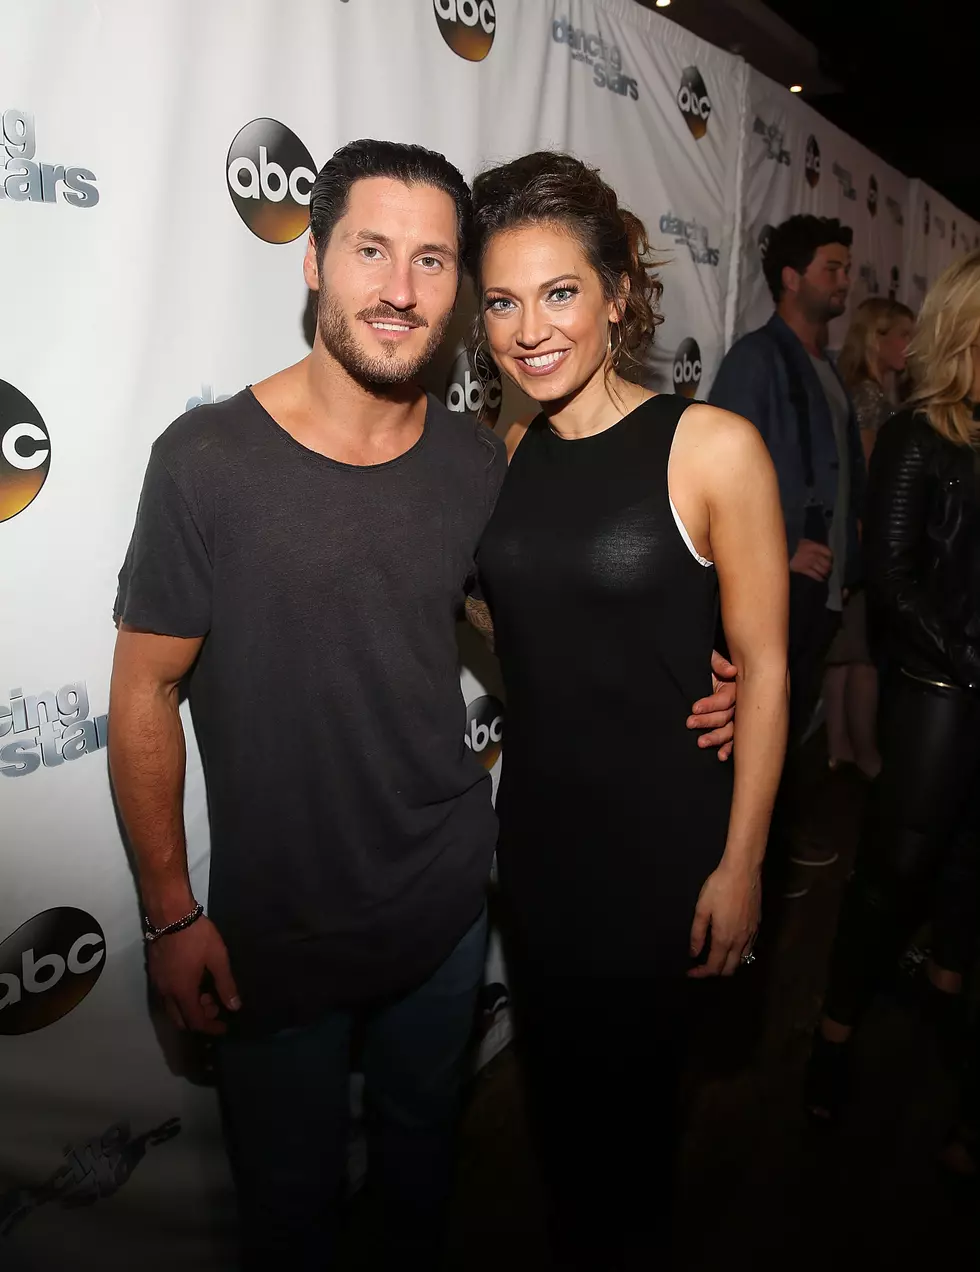 Ginger Zee shines on &#8216;Dancing with the Stars&#8217; despite injury